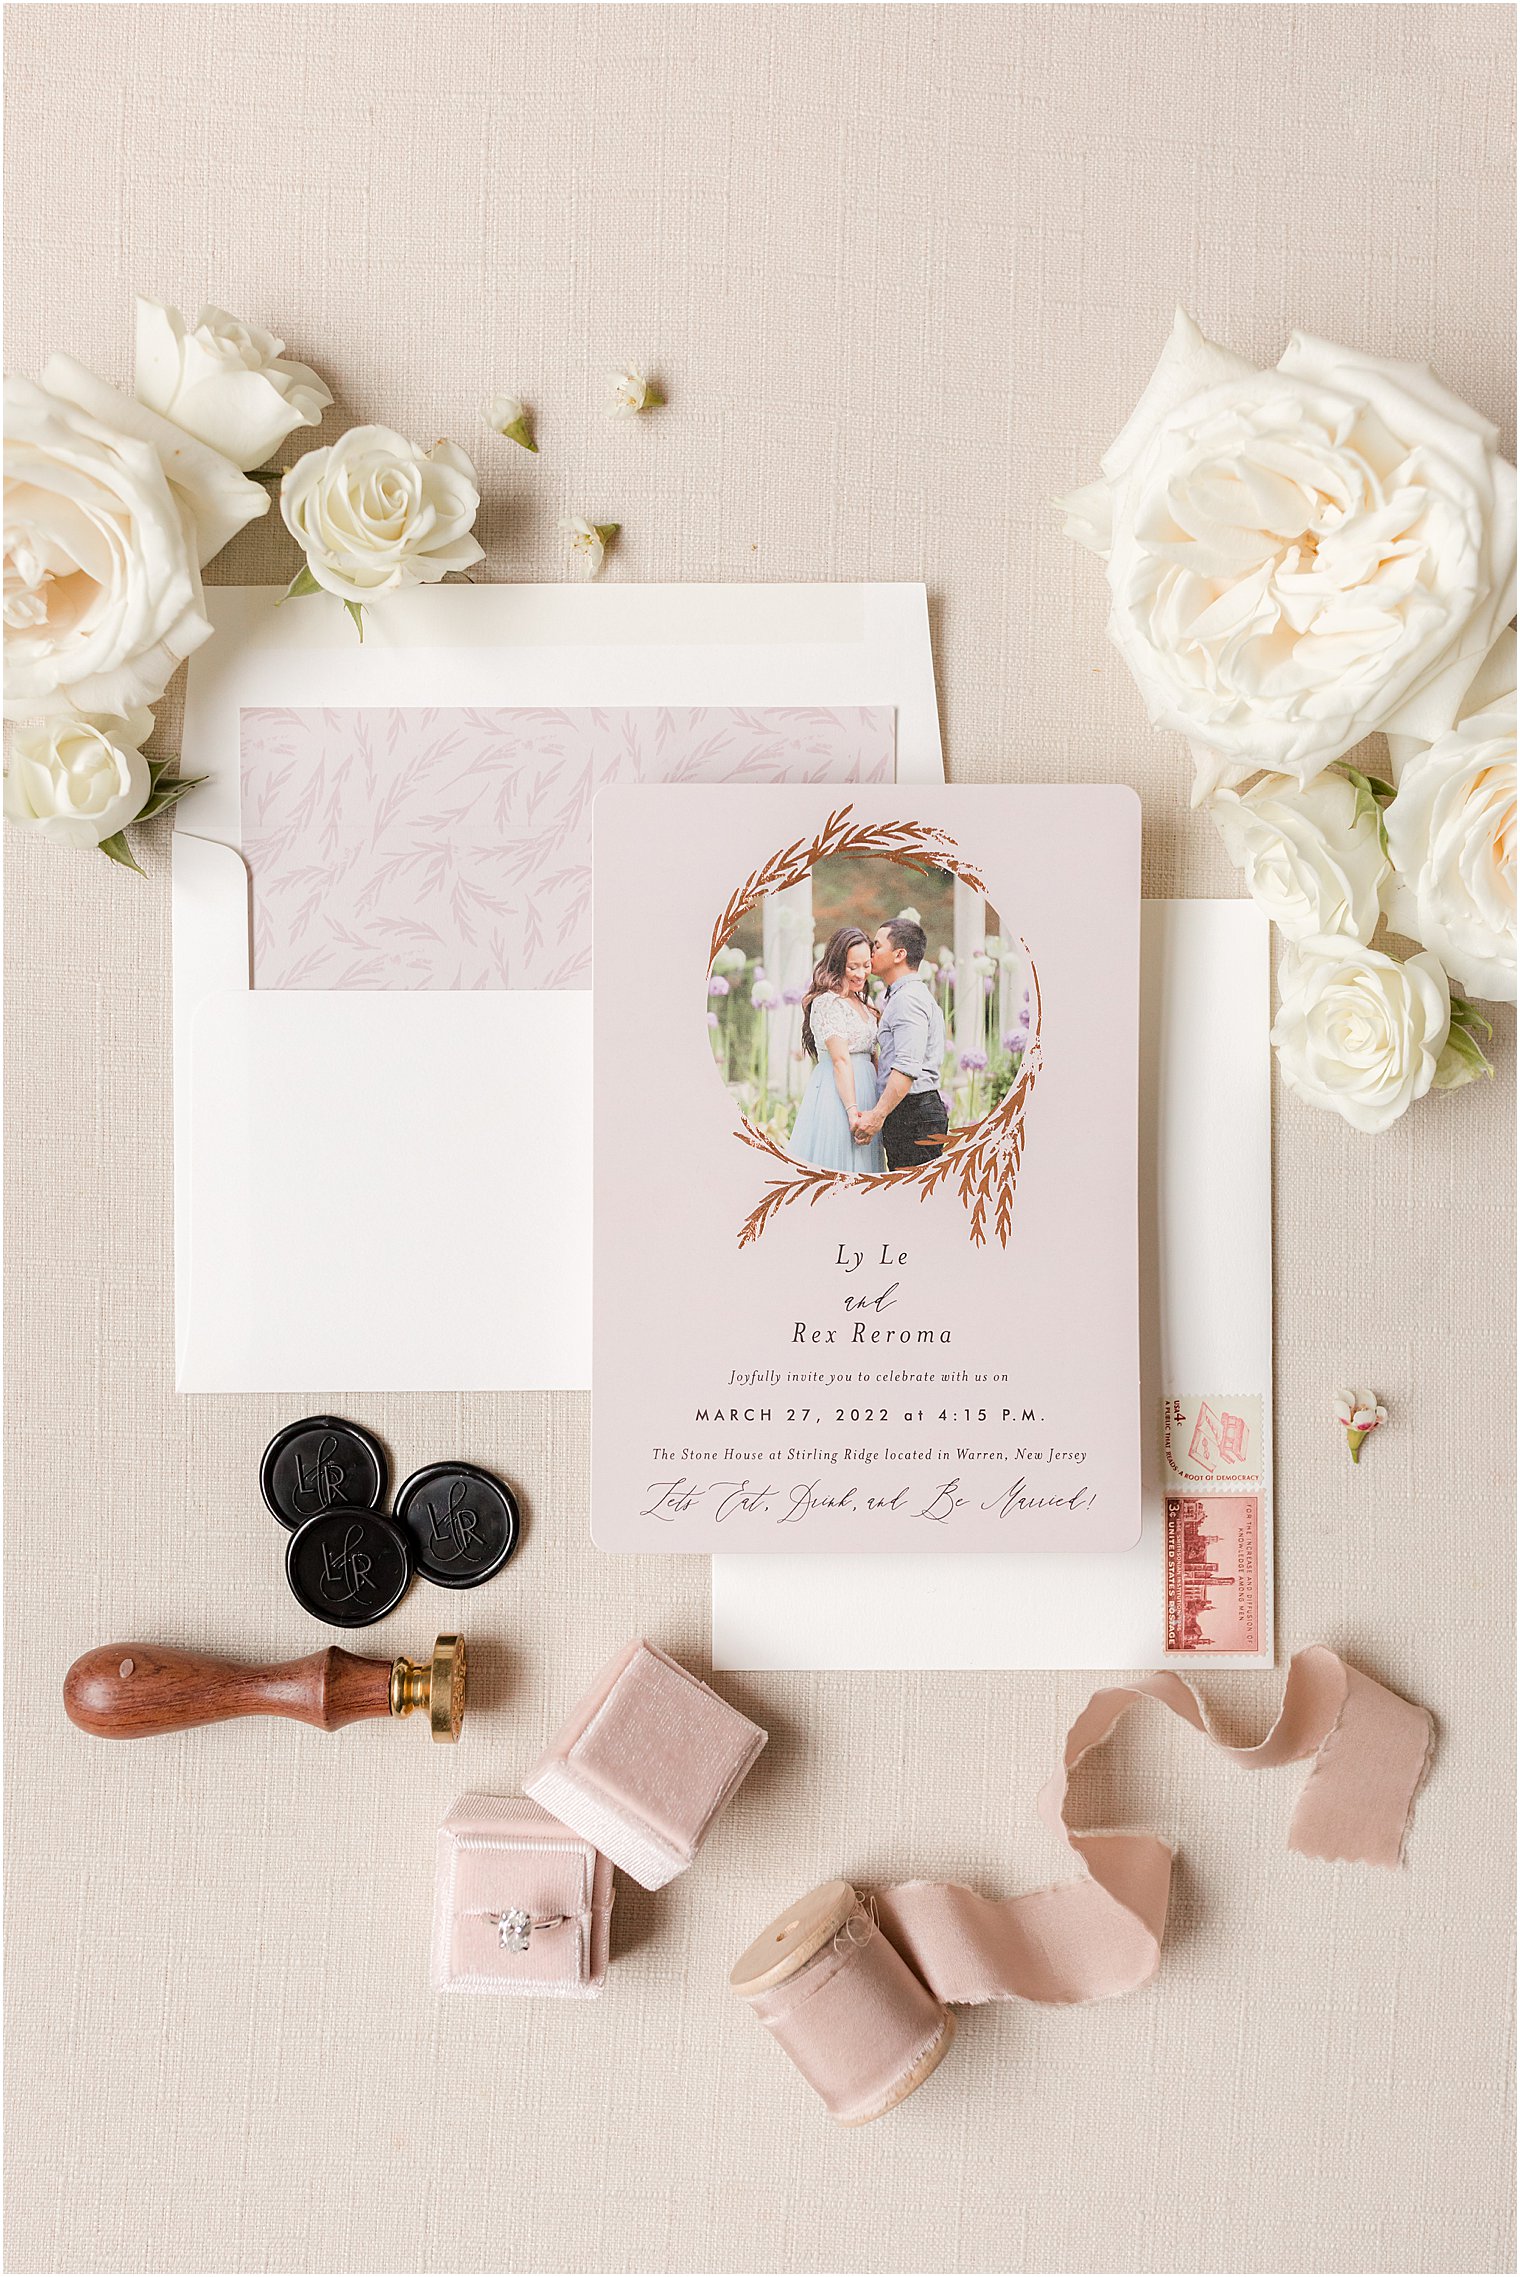 invitation suite for New Jersey wedding day